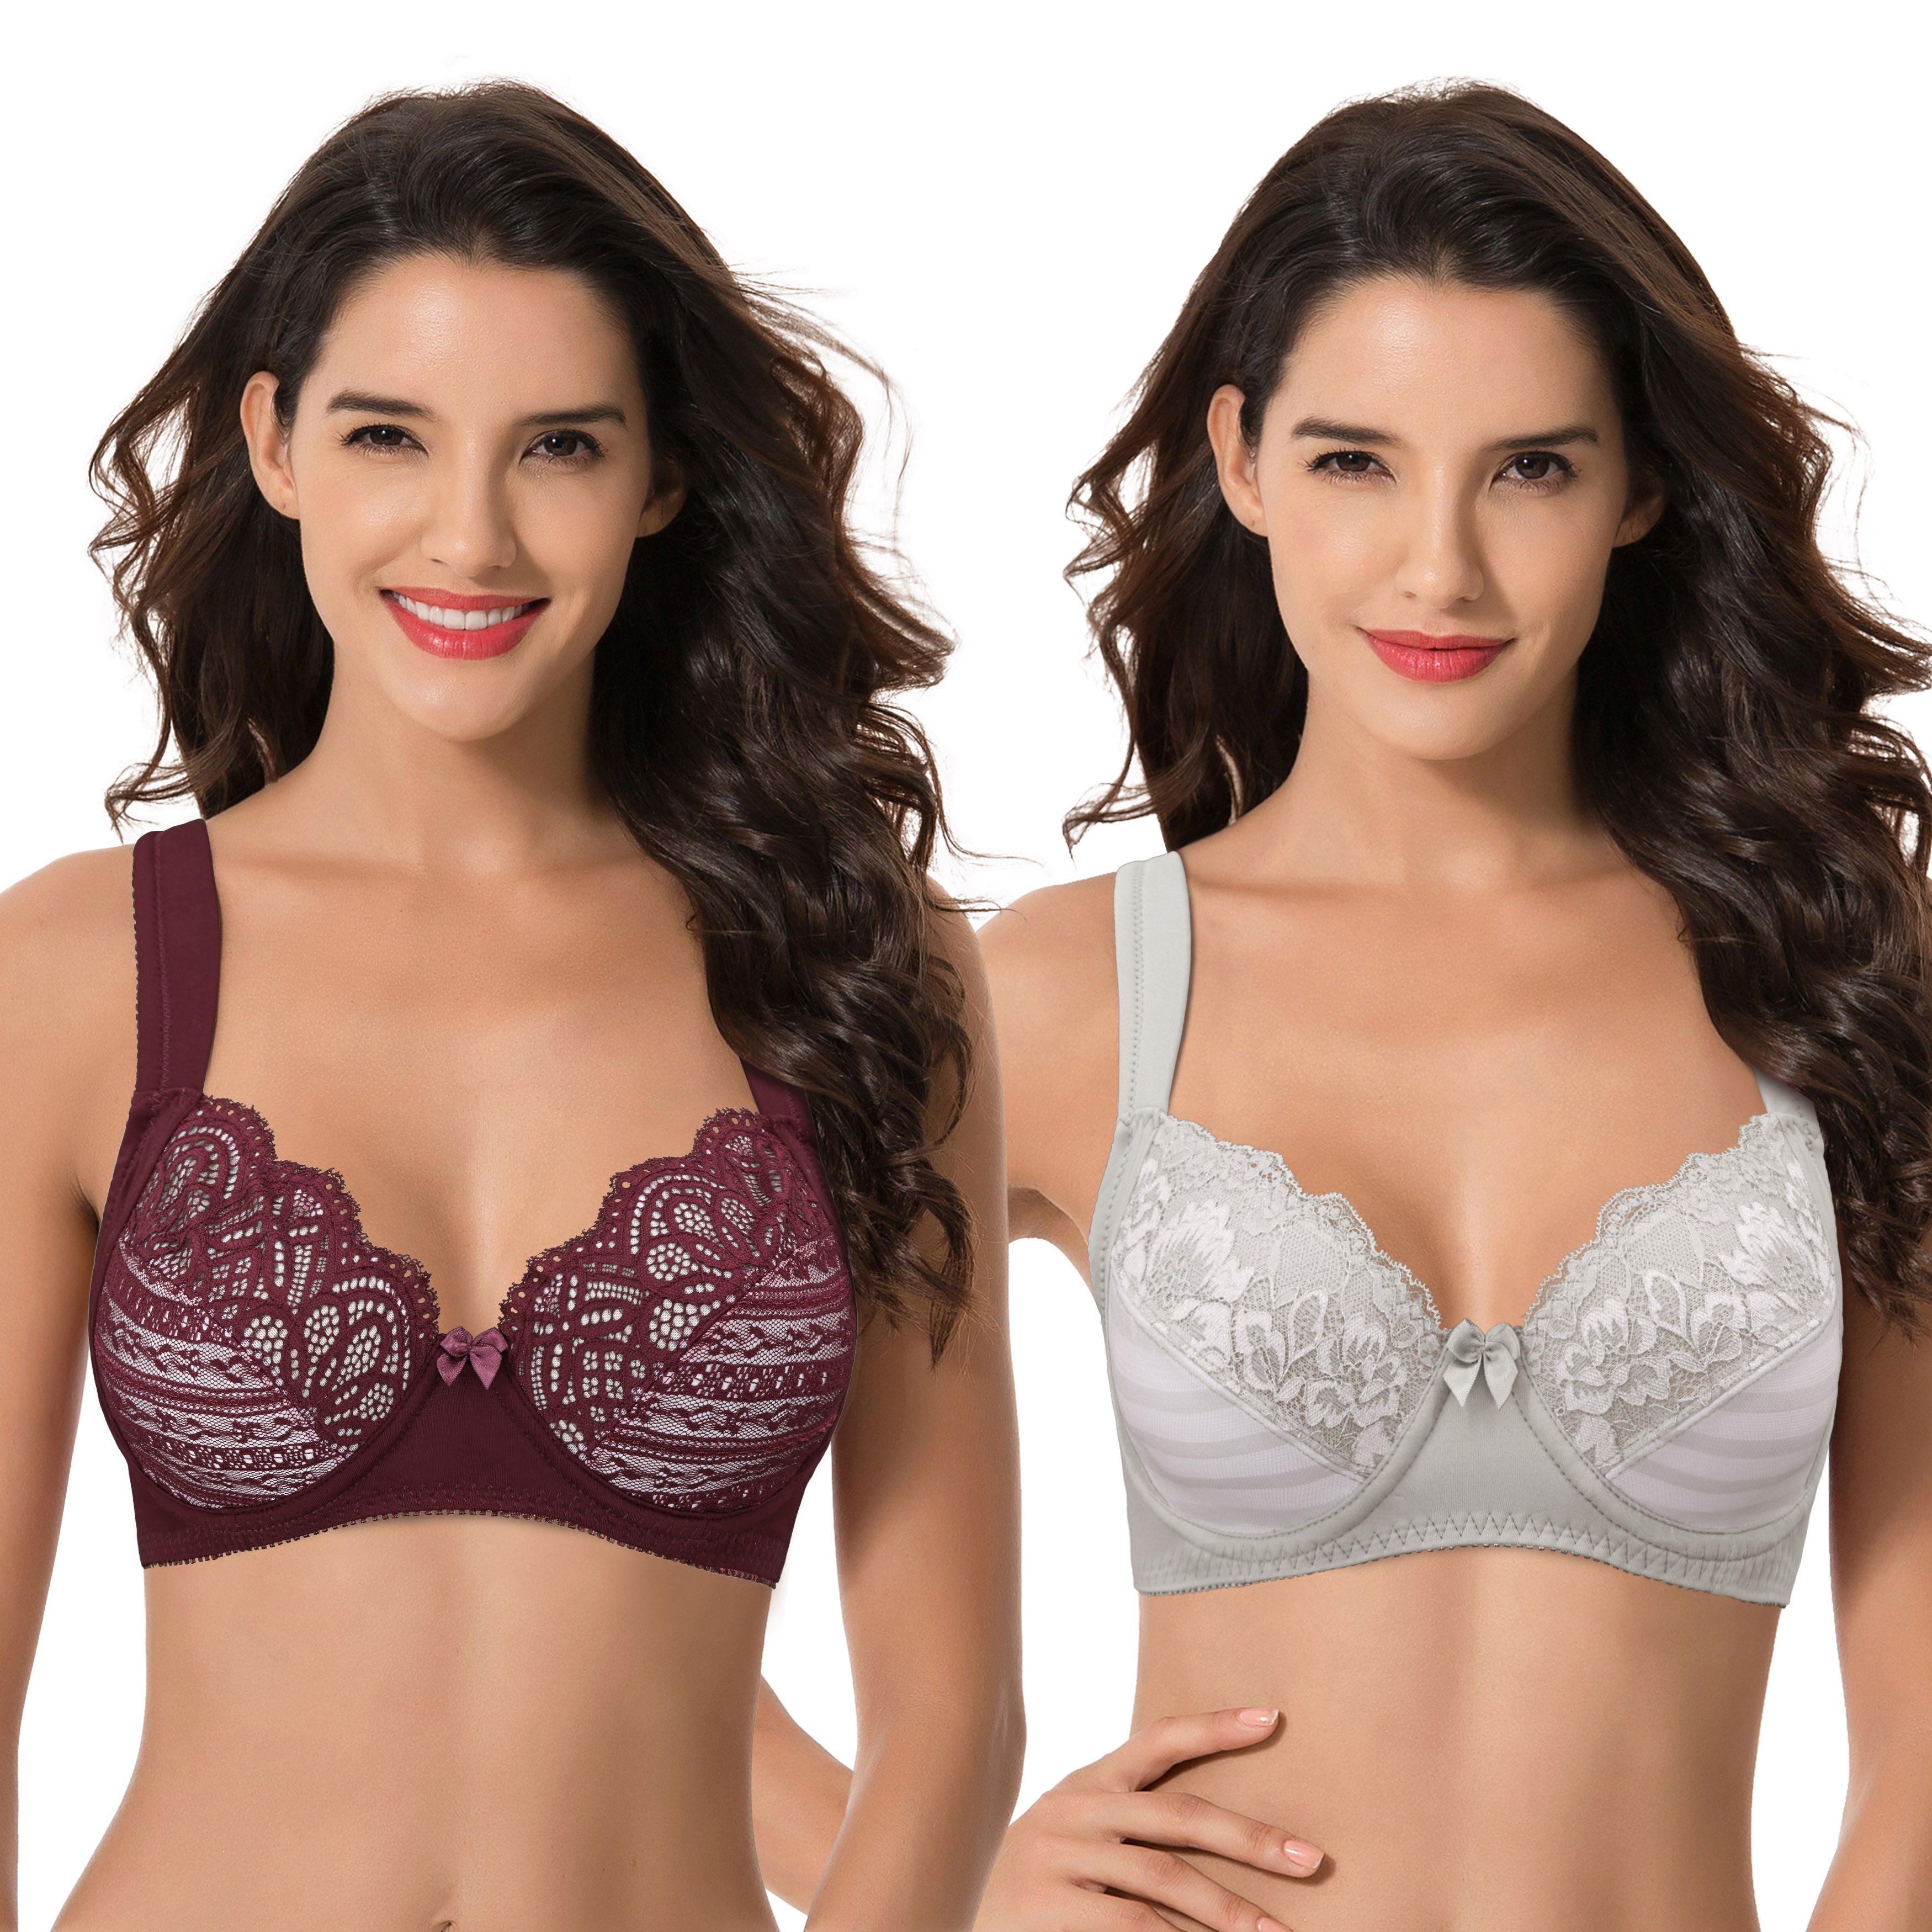 Curve Muse Women's Plus Size Unlined Underwire Lace Bra with Cushion Straps -Burgundy,Grey